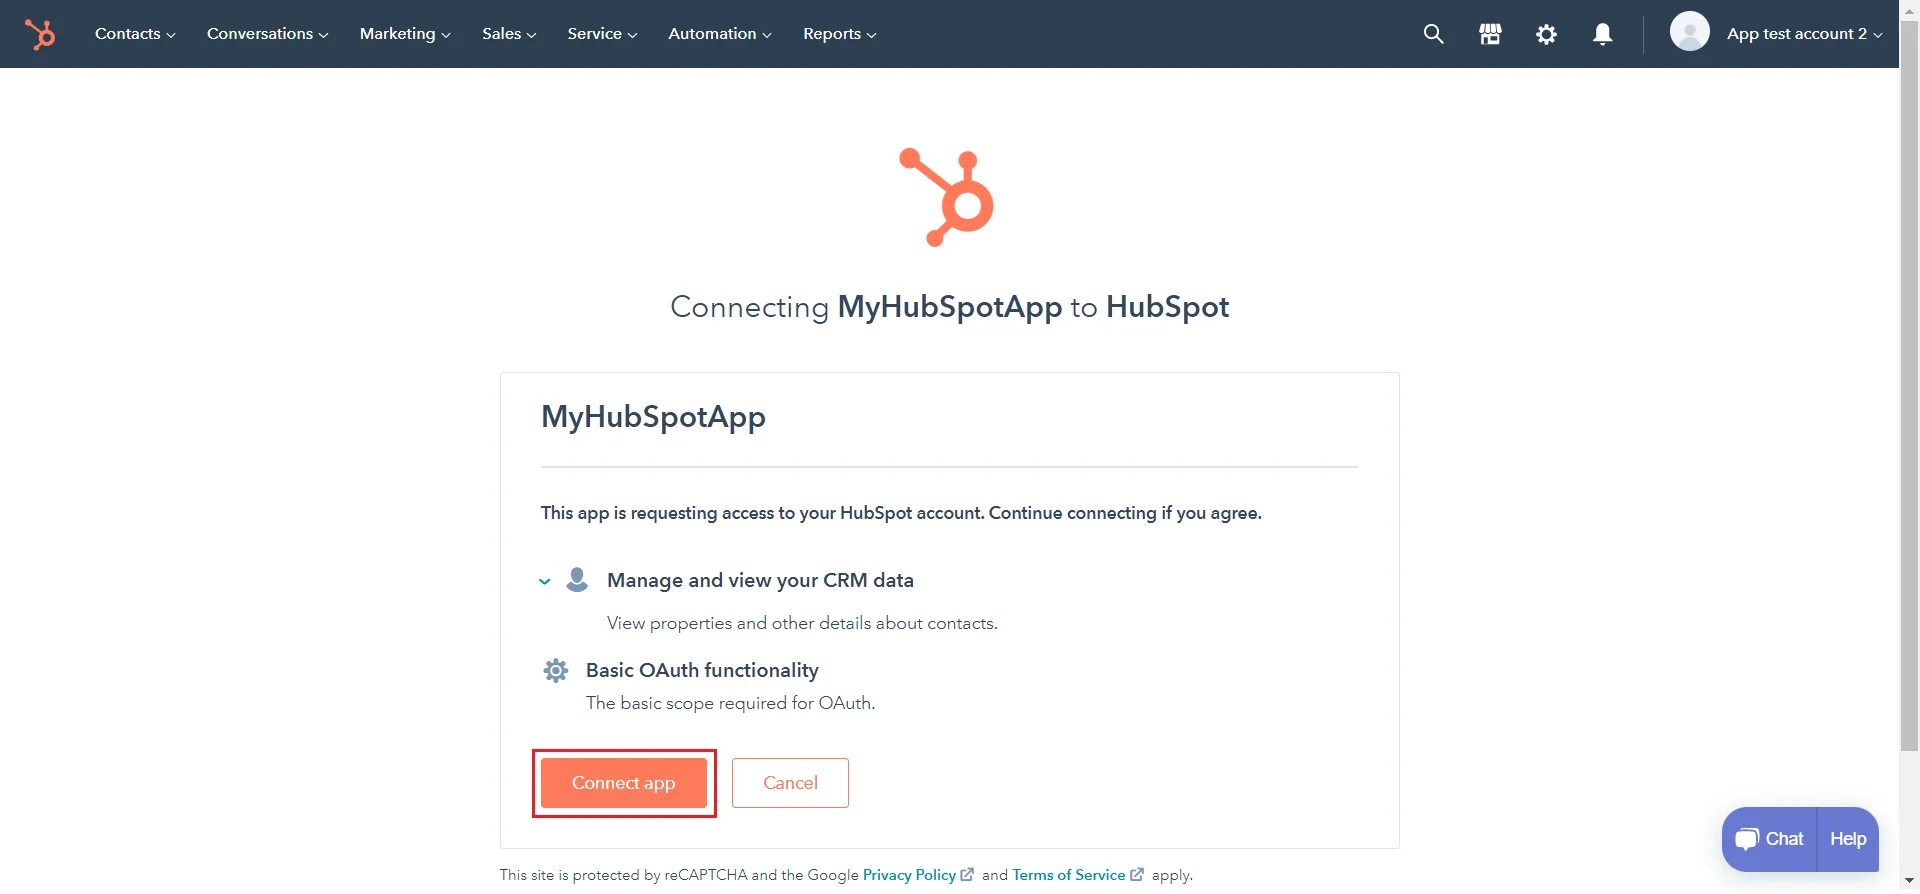 Enable Hubspot Single Sign-On(SSO)  Login using Google as Identity Provider
   